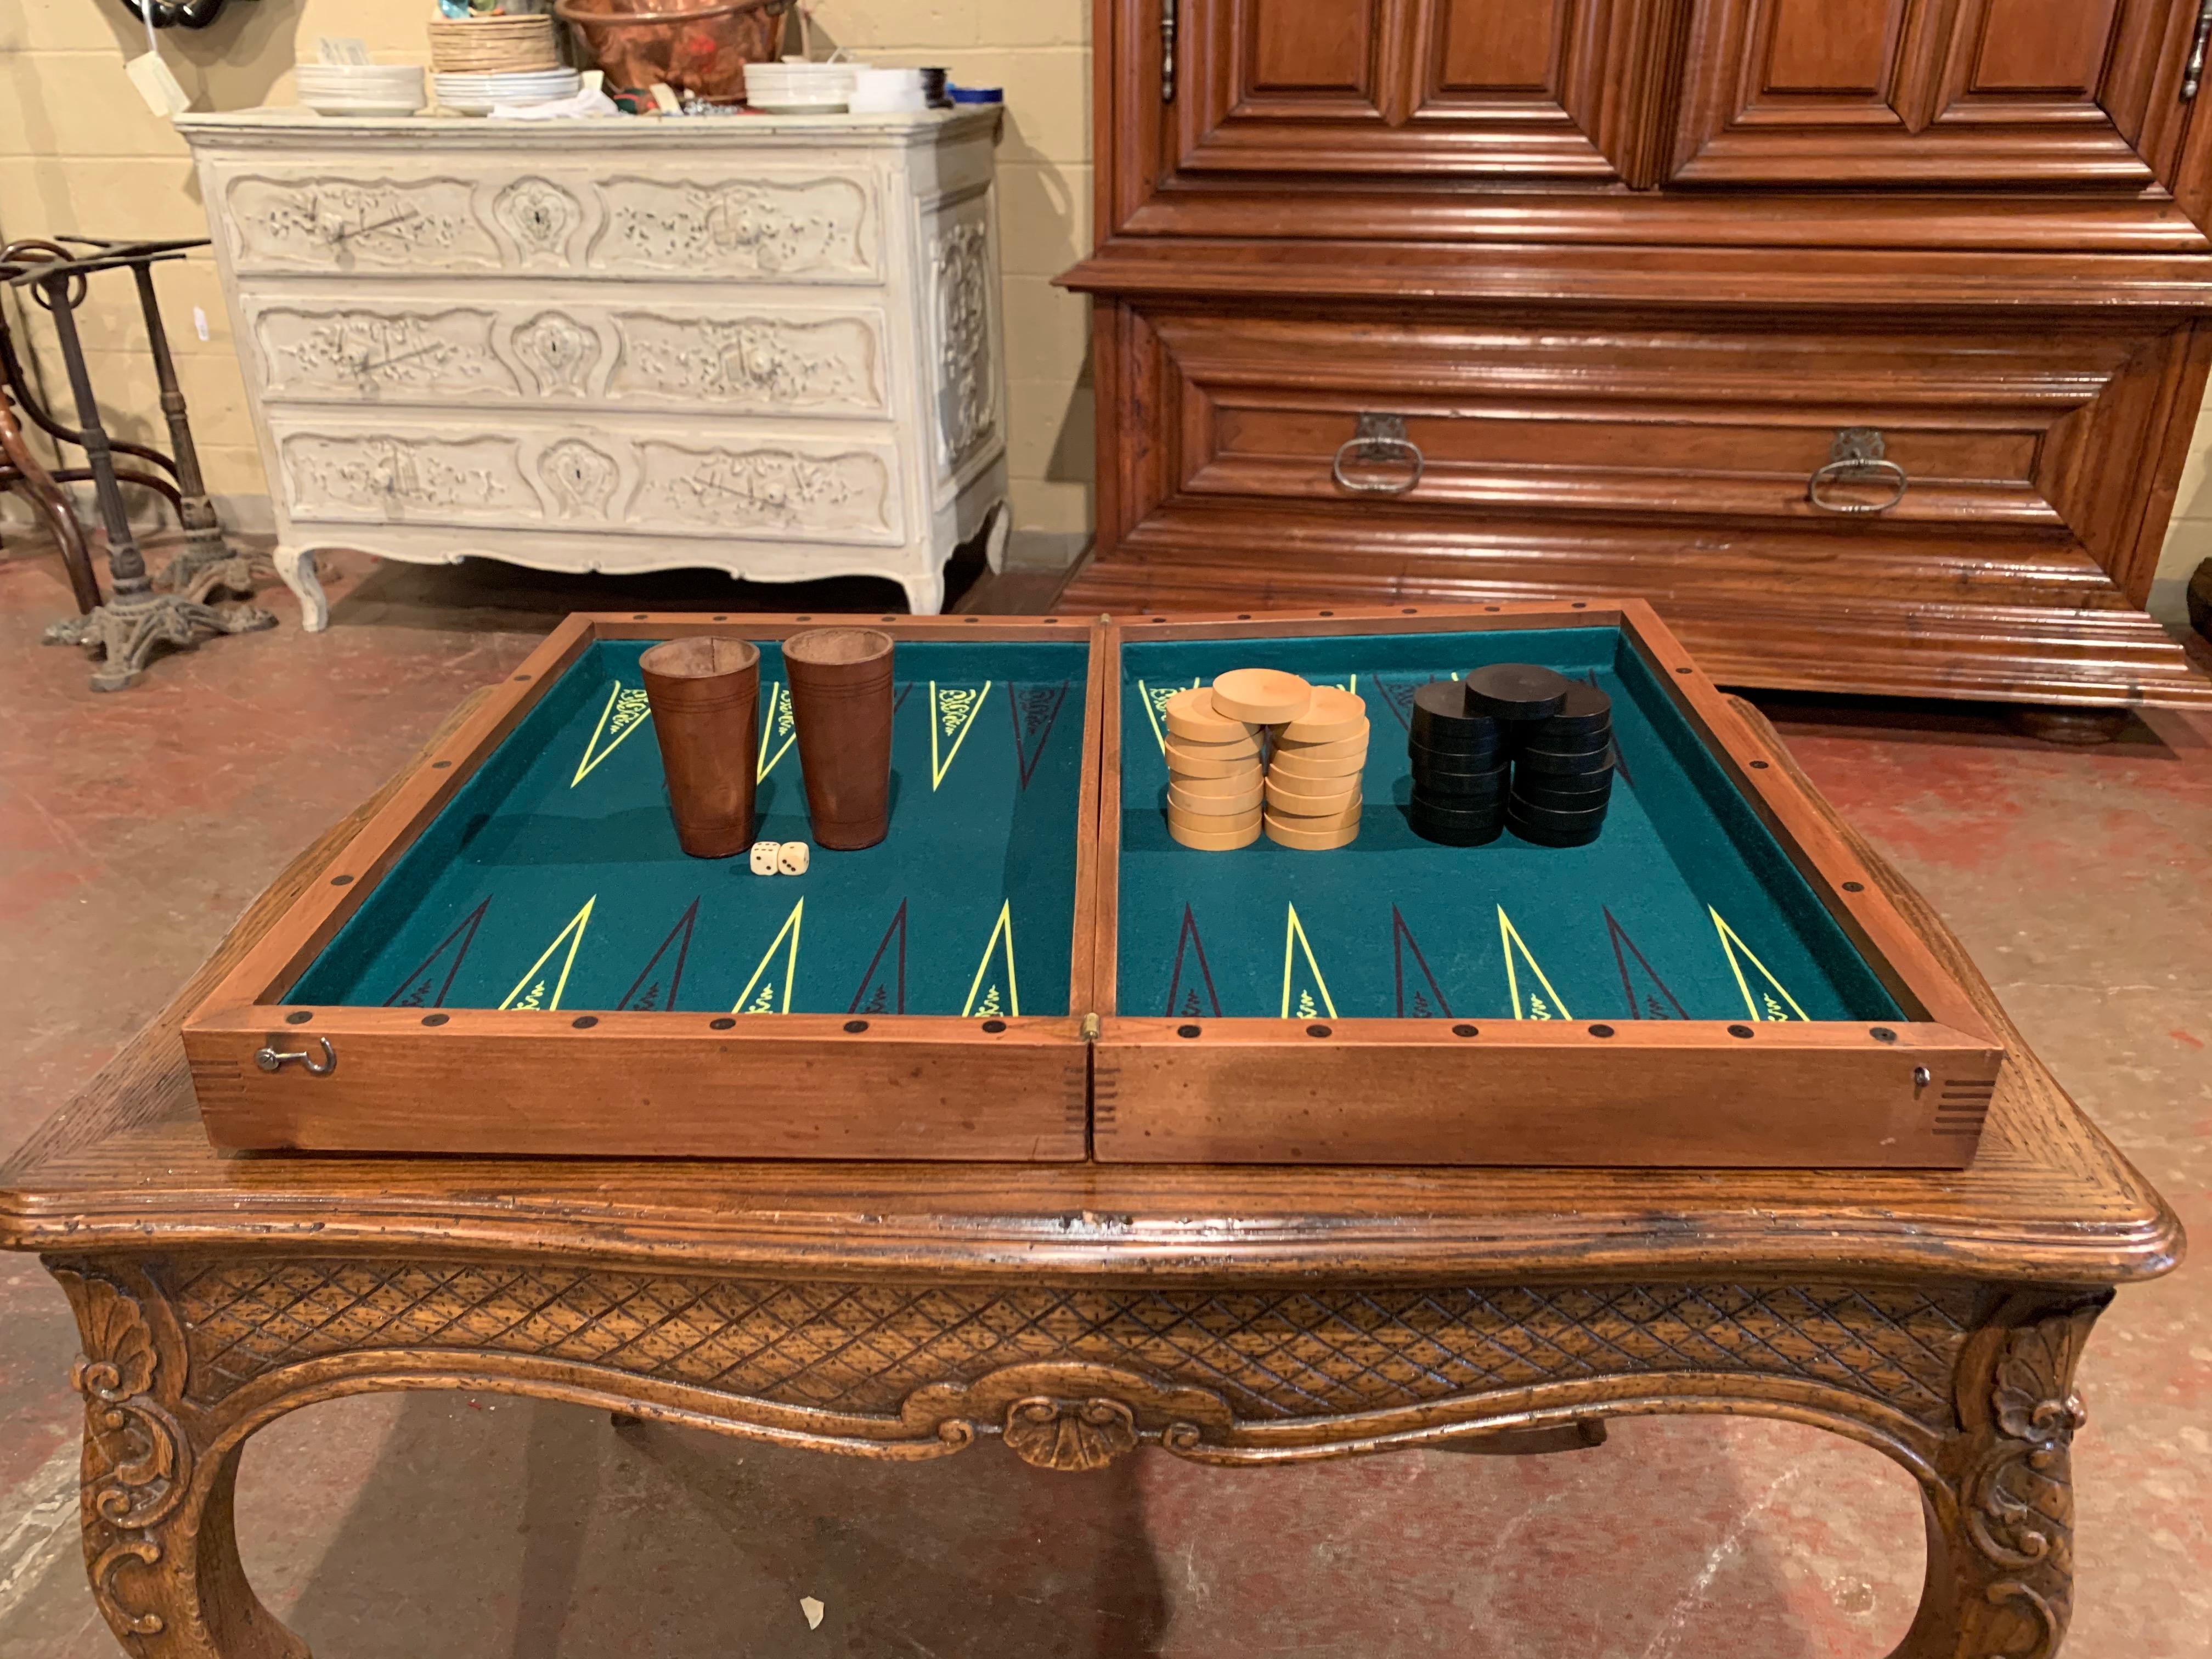 Decorate a study or a game room with this antique checkers or backgammon game; created in France circa 1890, the board game is made of walnut with inlay decor, with green felt in the inside. The game has 30 round pieces including the original two